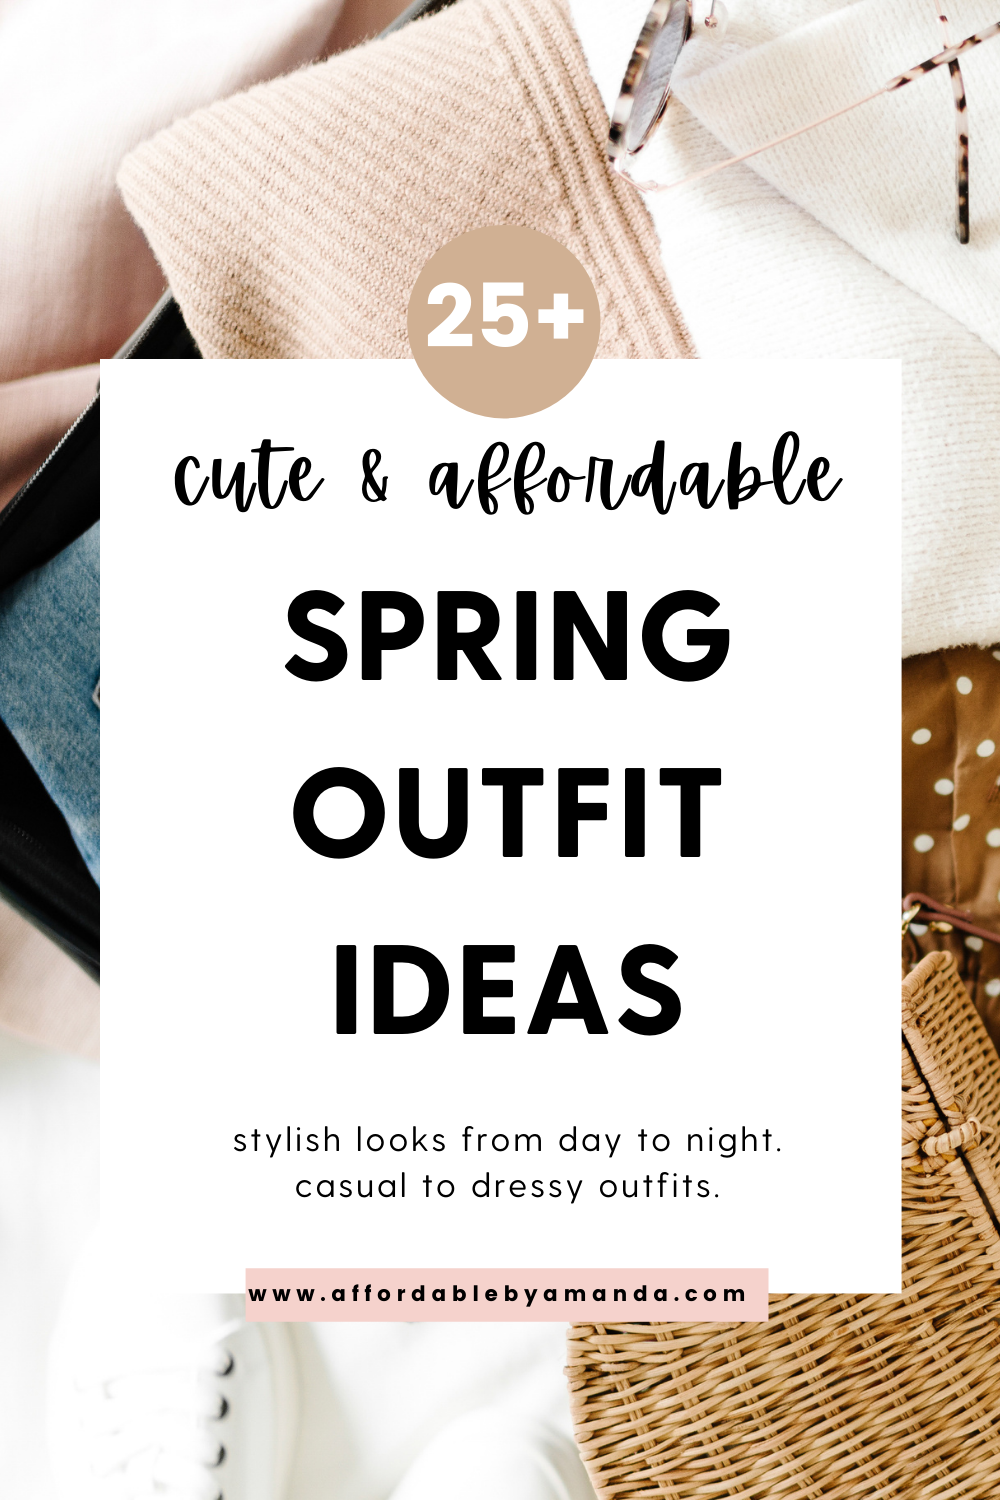 Elegant Spring Outfits for 2021  Classy Outfits for Well dressed Women 